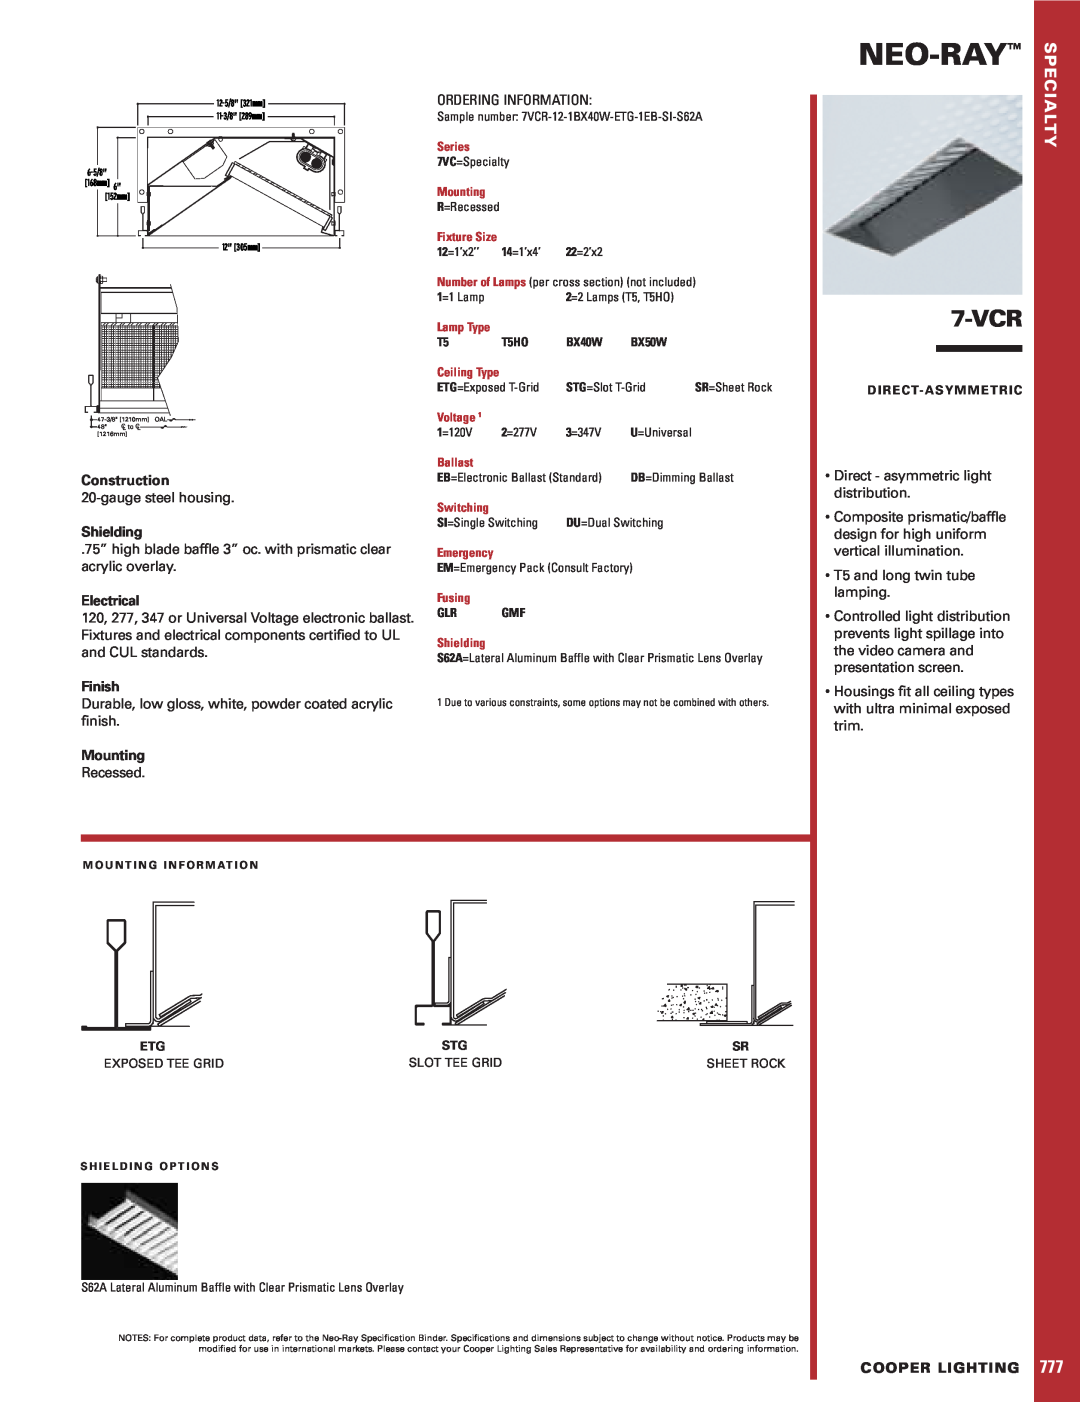 Cooper Lighting 7VCR specifications Neo-Ray, 7-VCR, Construction, Shielding, Electrical, Finish, Mounting, Cooper Lighting 